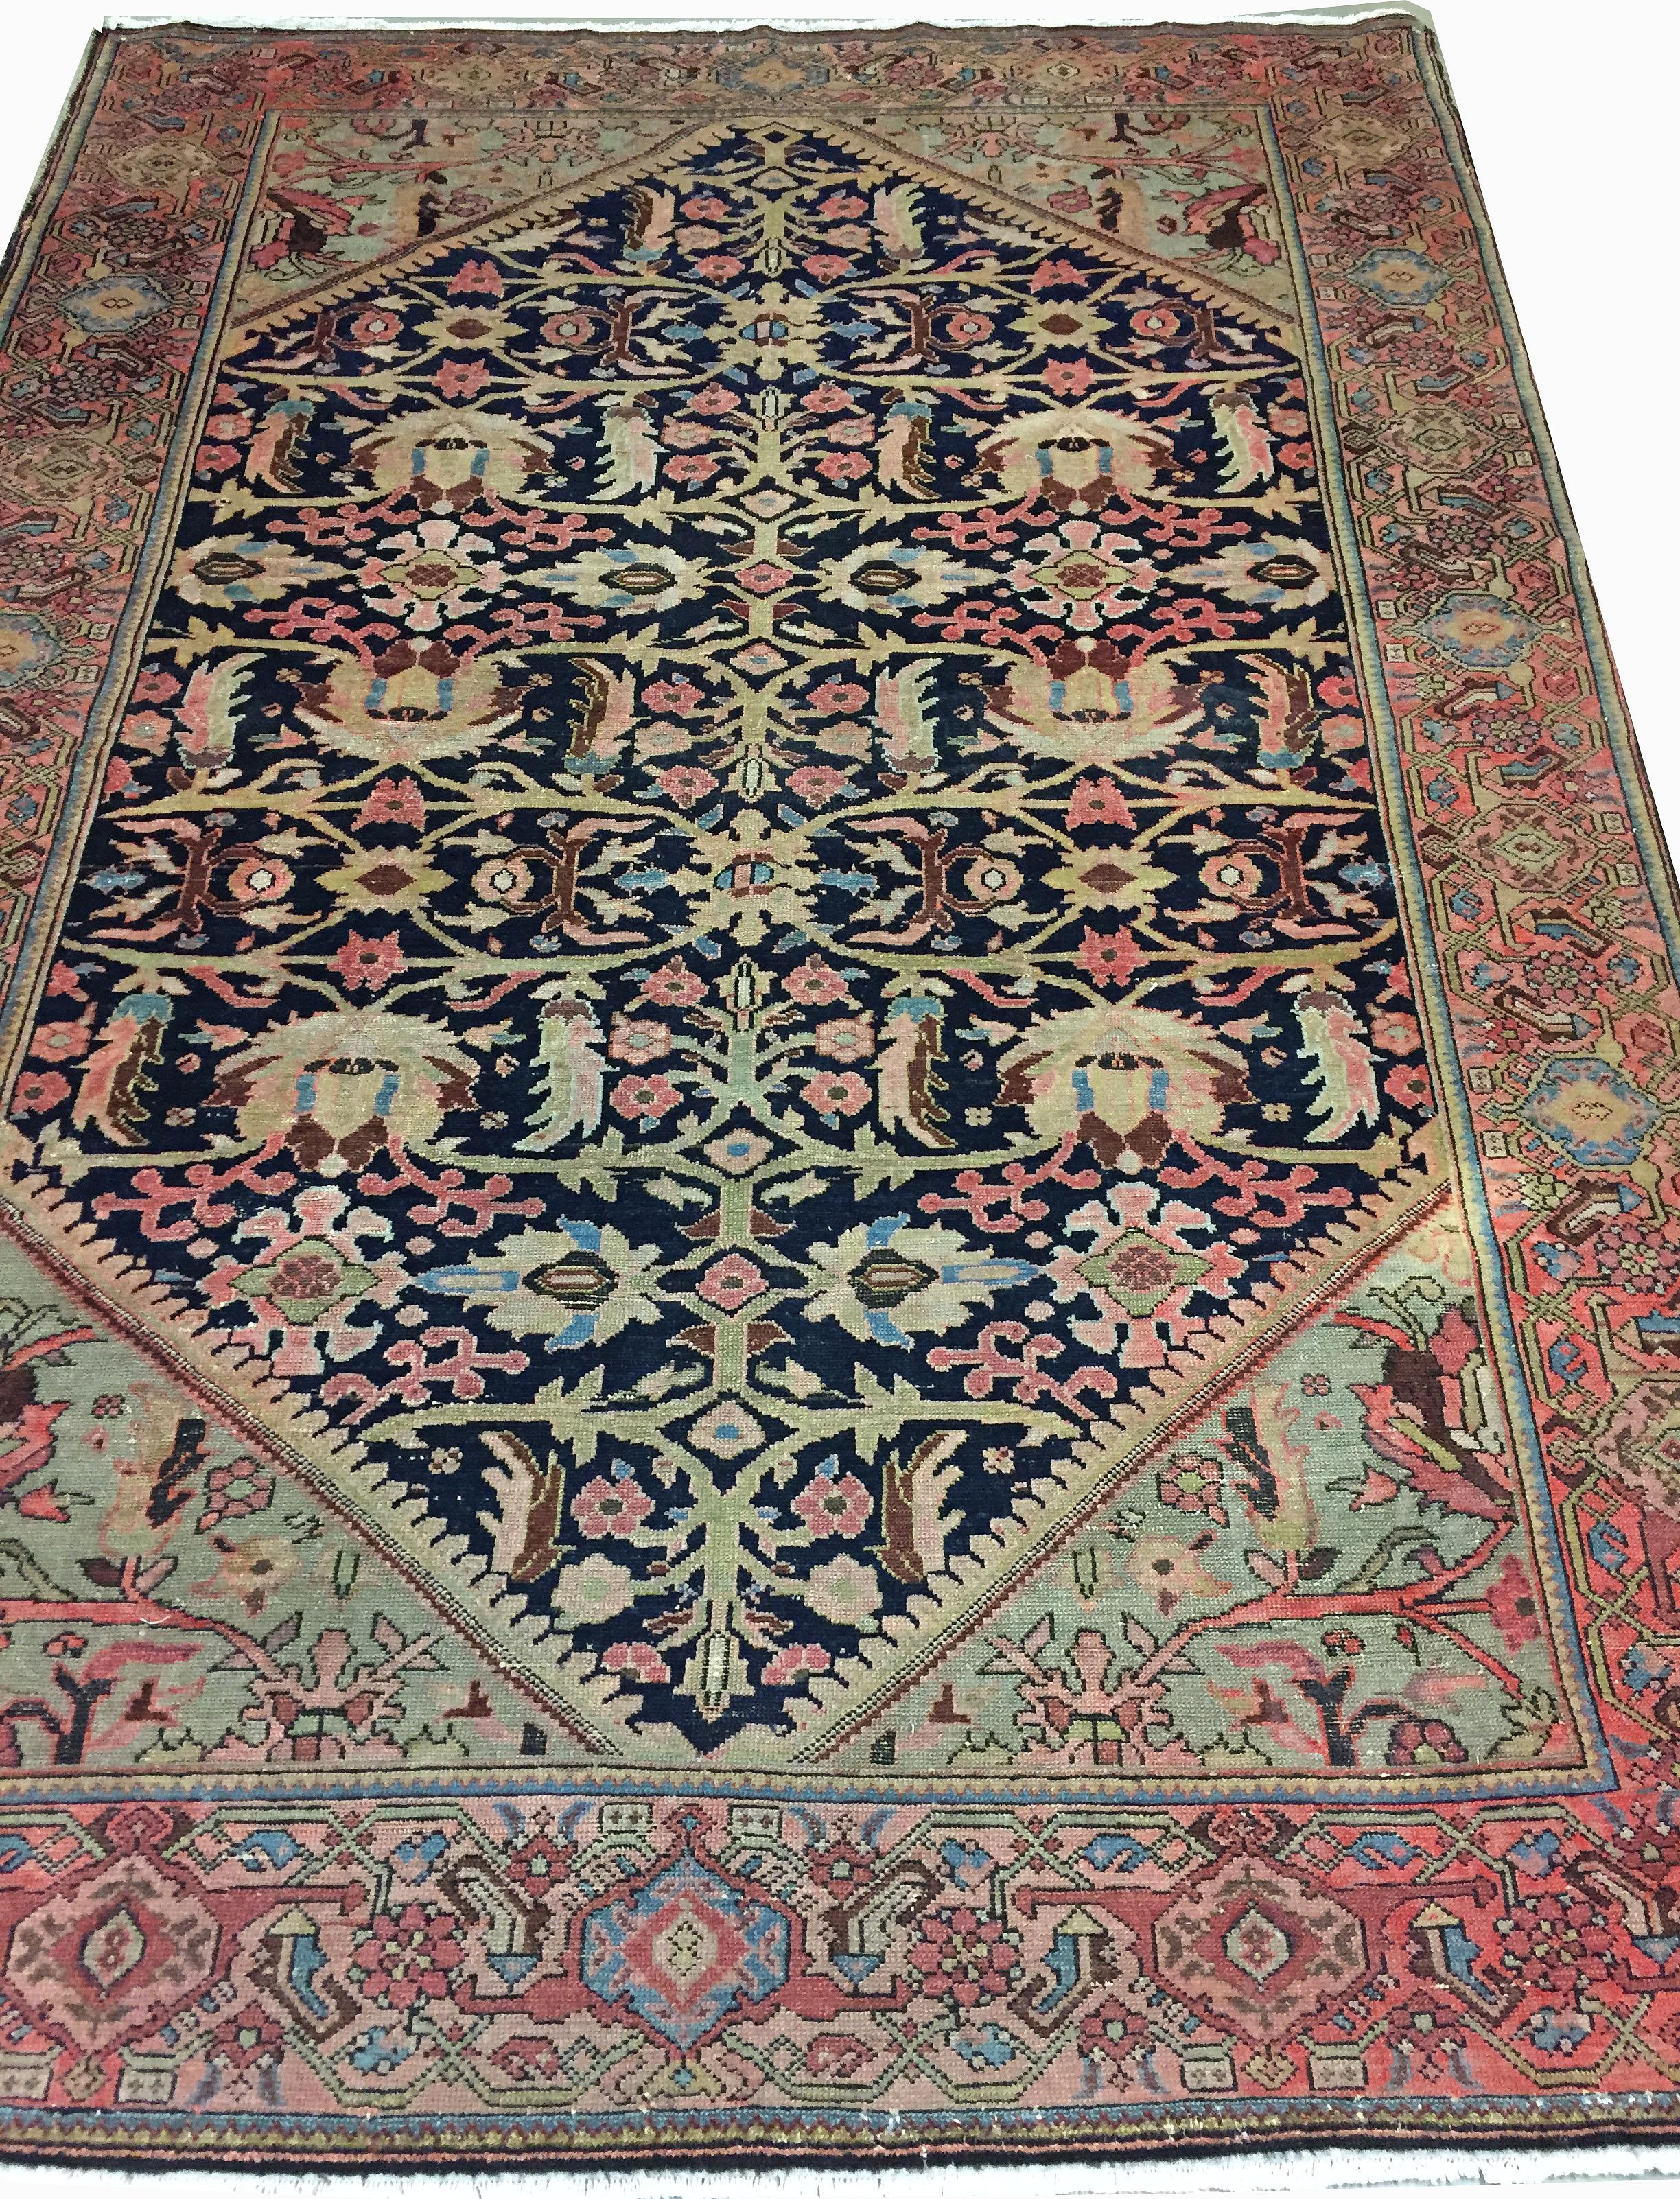 Antique Persian Sarouk rug, 4'6 x 7'7. A lovely Sarouk rug from Persia, circa 1900. The navy blue ground has wonderfully detailed floral and vine designs that show the true craftsmanship of Fine weaving at its best. The soft borders and four